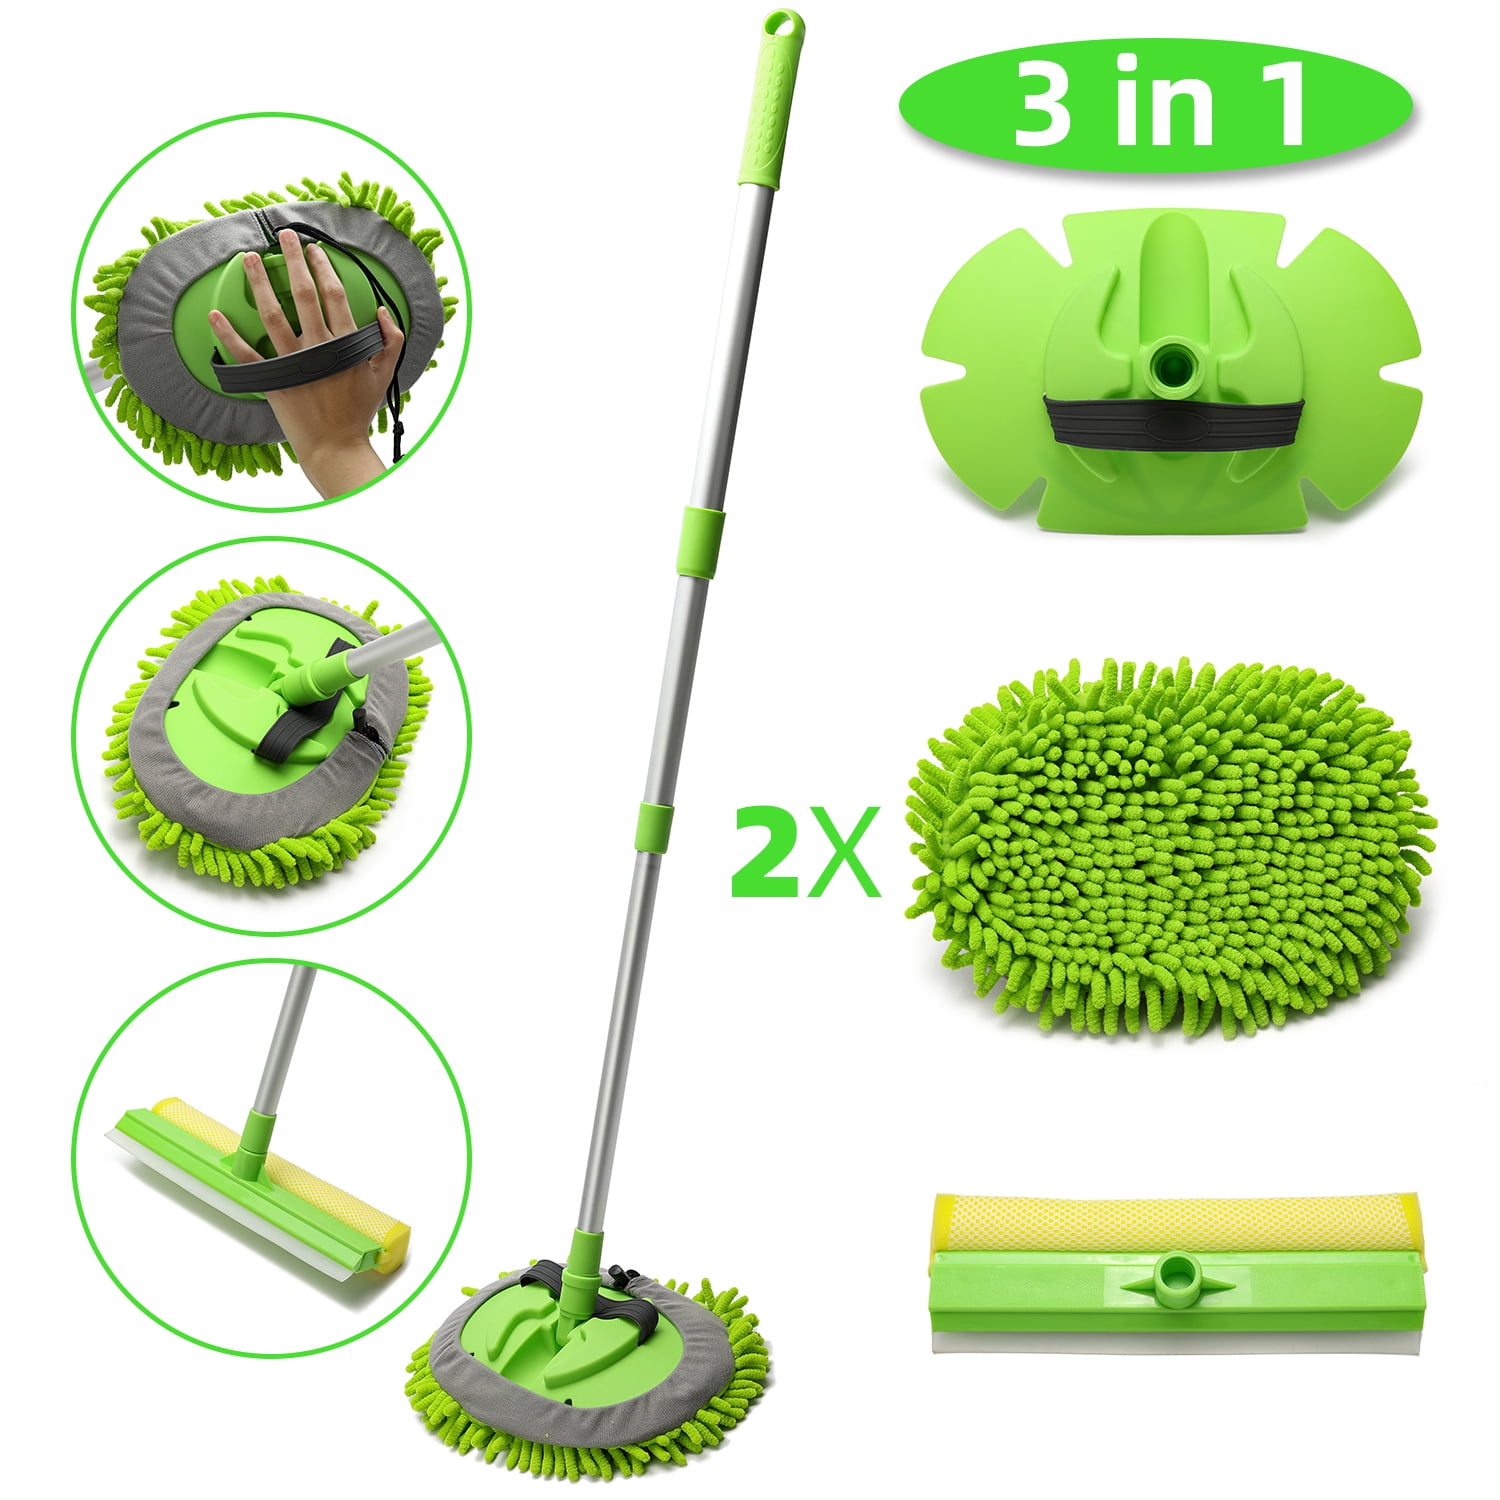 2 in 1 Microfiber Car Wash Mop Mitt with 45 Aluminum Alloy Long  Handle,Chenille Car Cleaning Kit Brush Duster with Scratch Free for Washing